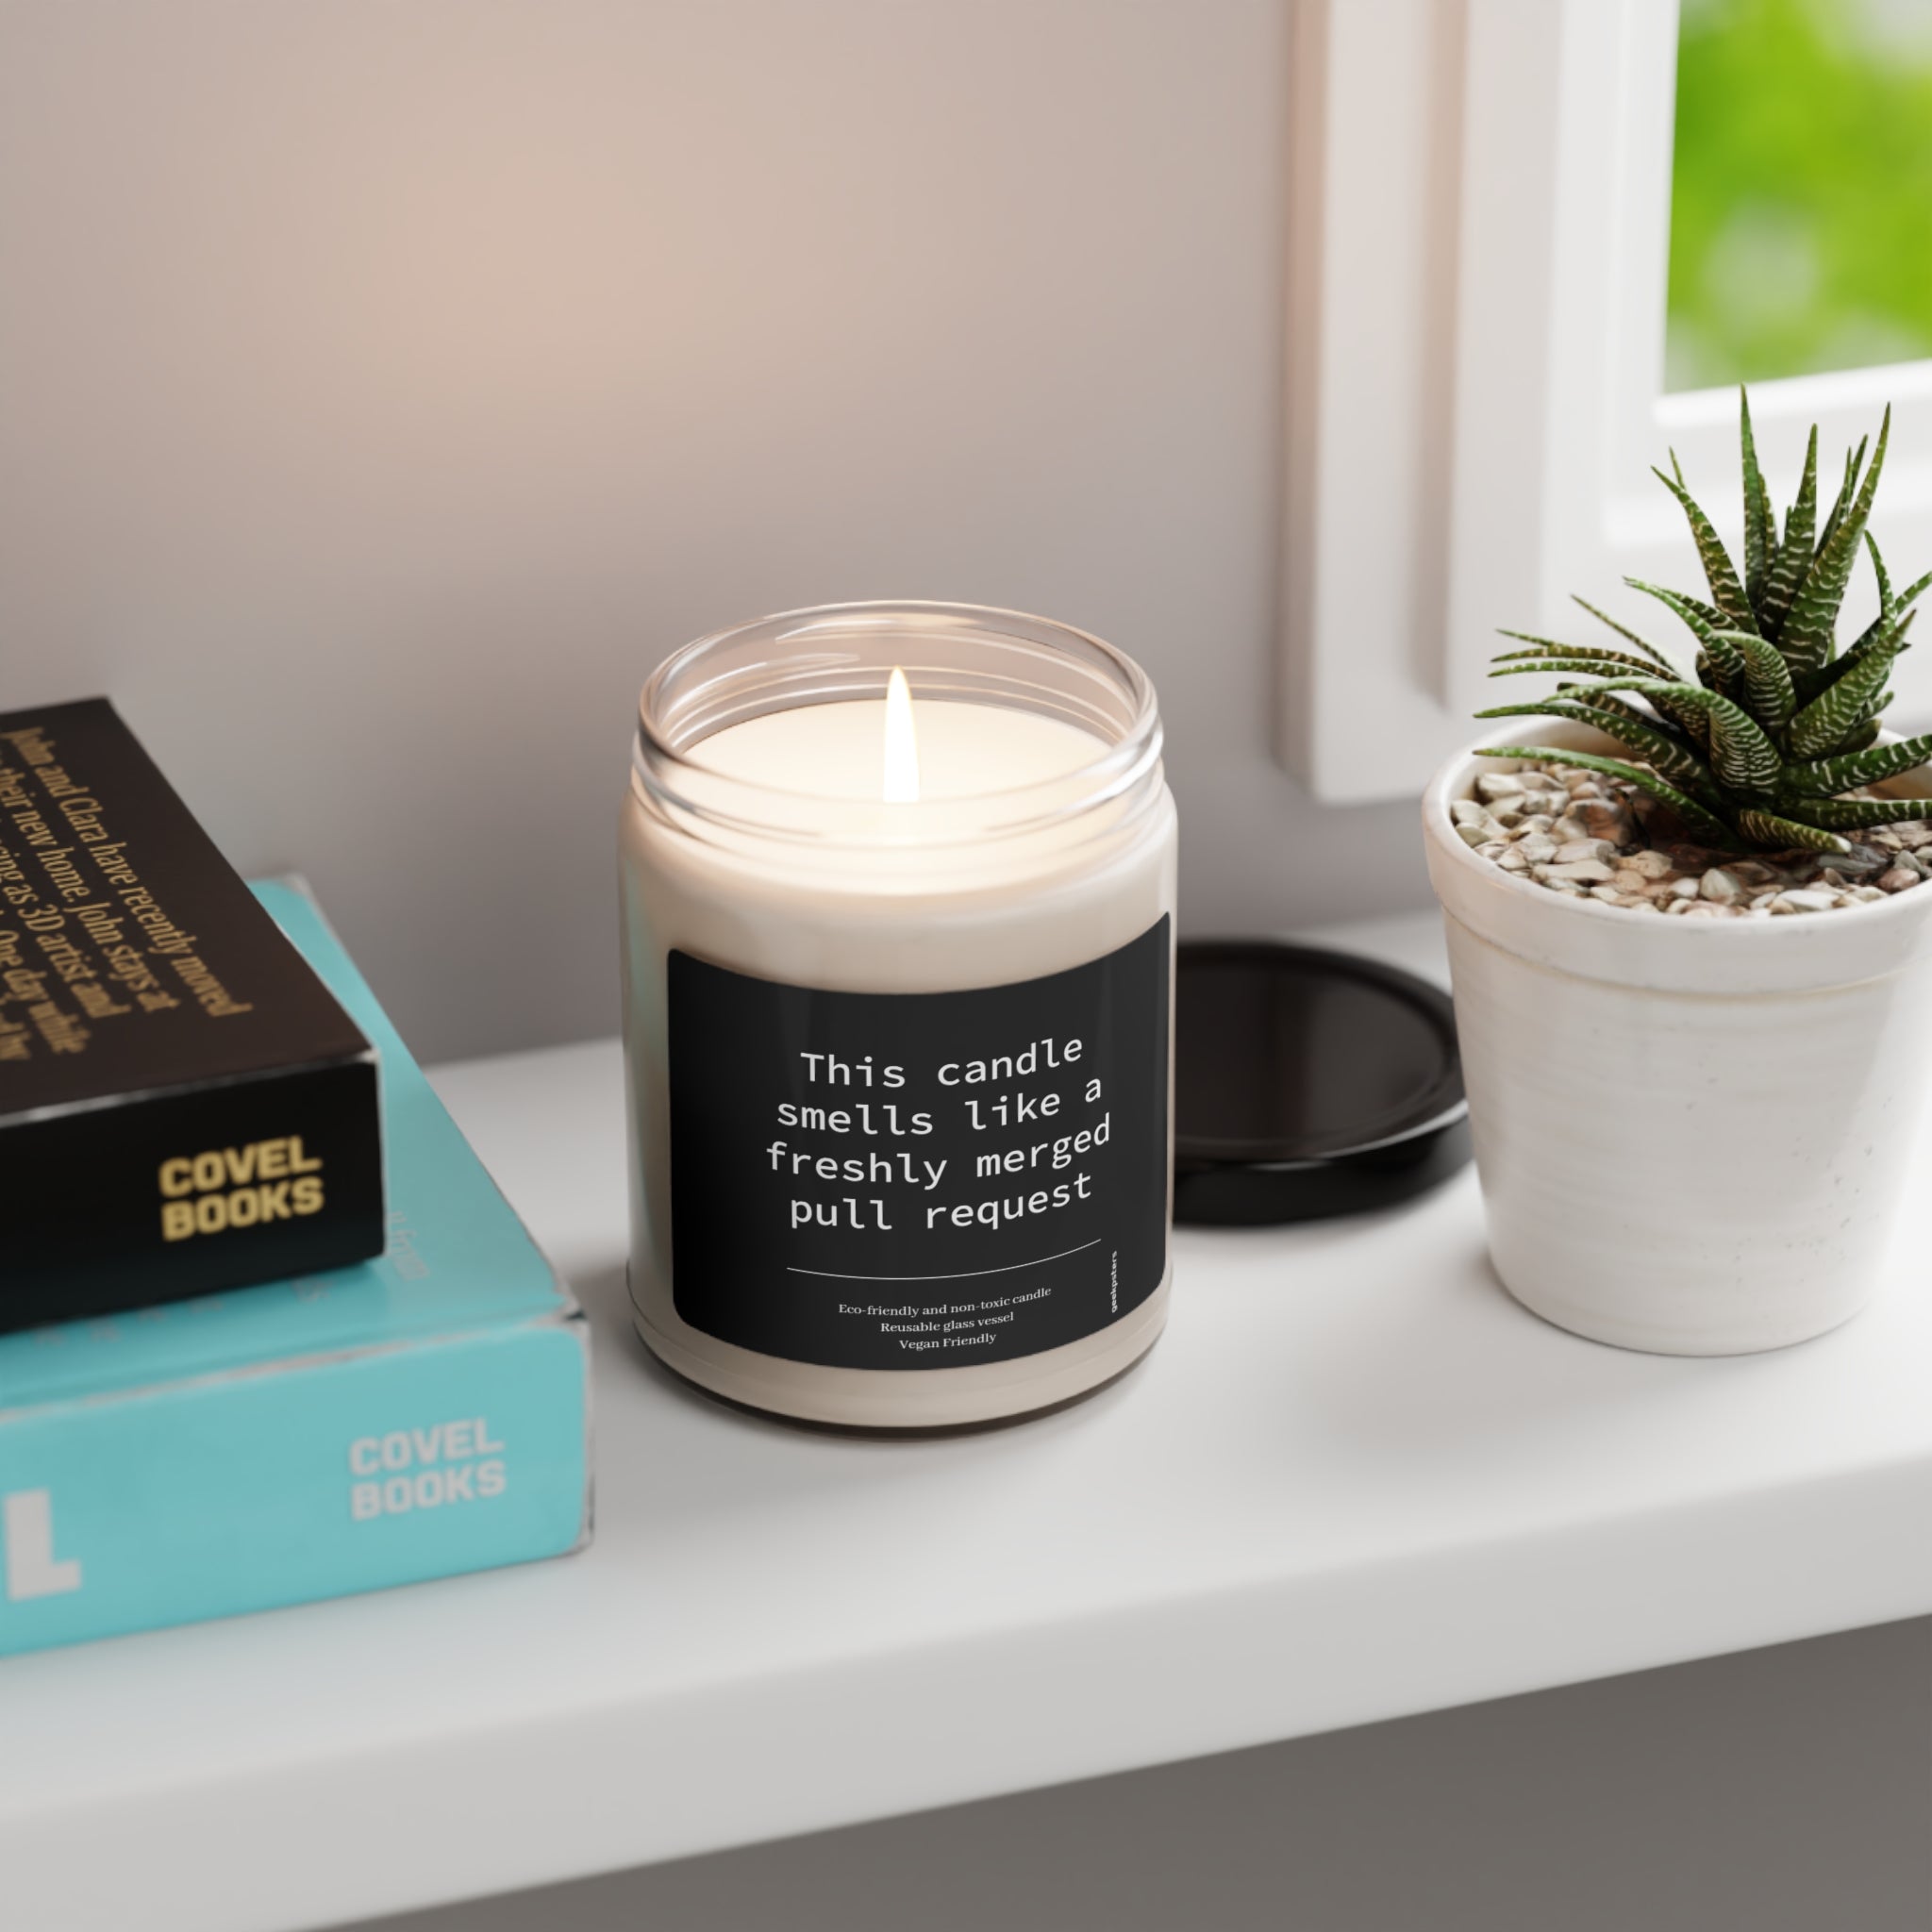 A scented candle with a humorous label rests on a windowsill beside a potted plant and a stack of books. This This Candle Smells Like a Freshly Merged Pull Request candle features a natural soy wax blend for an eco-friendly burn.